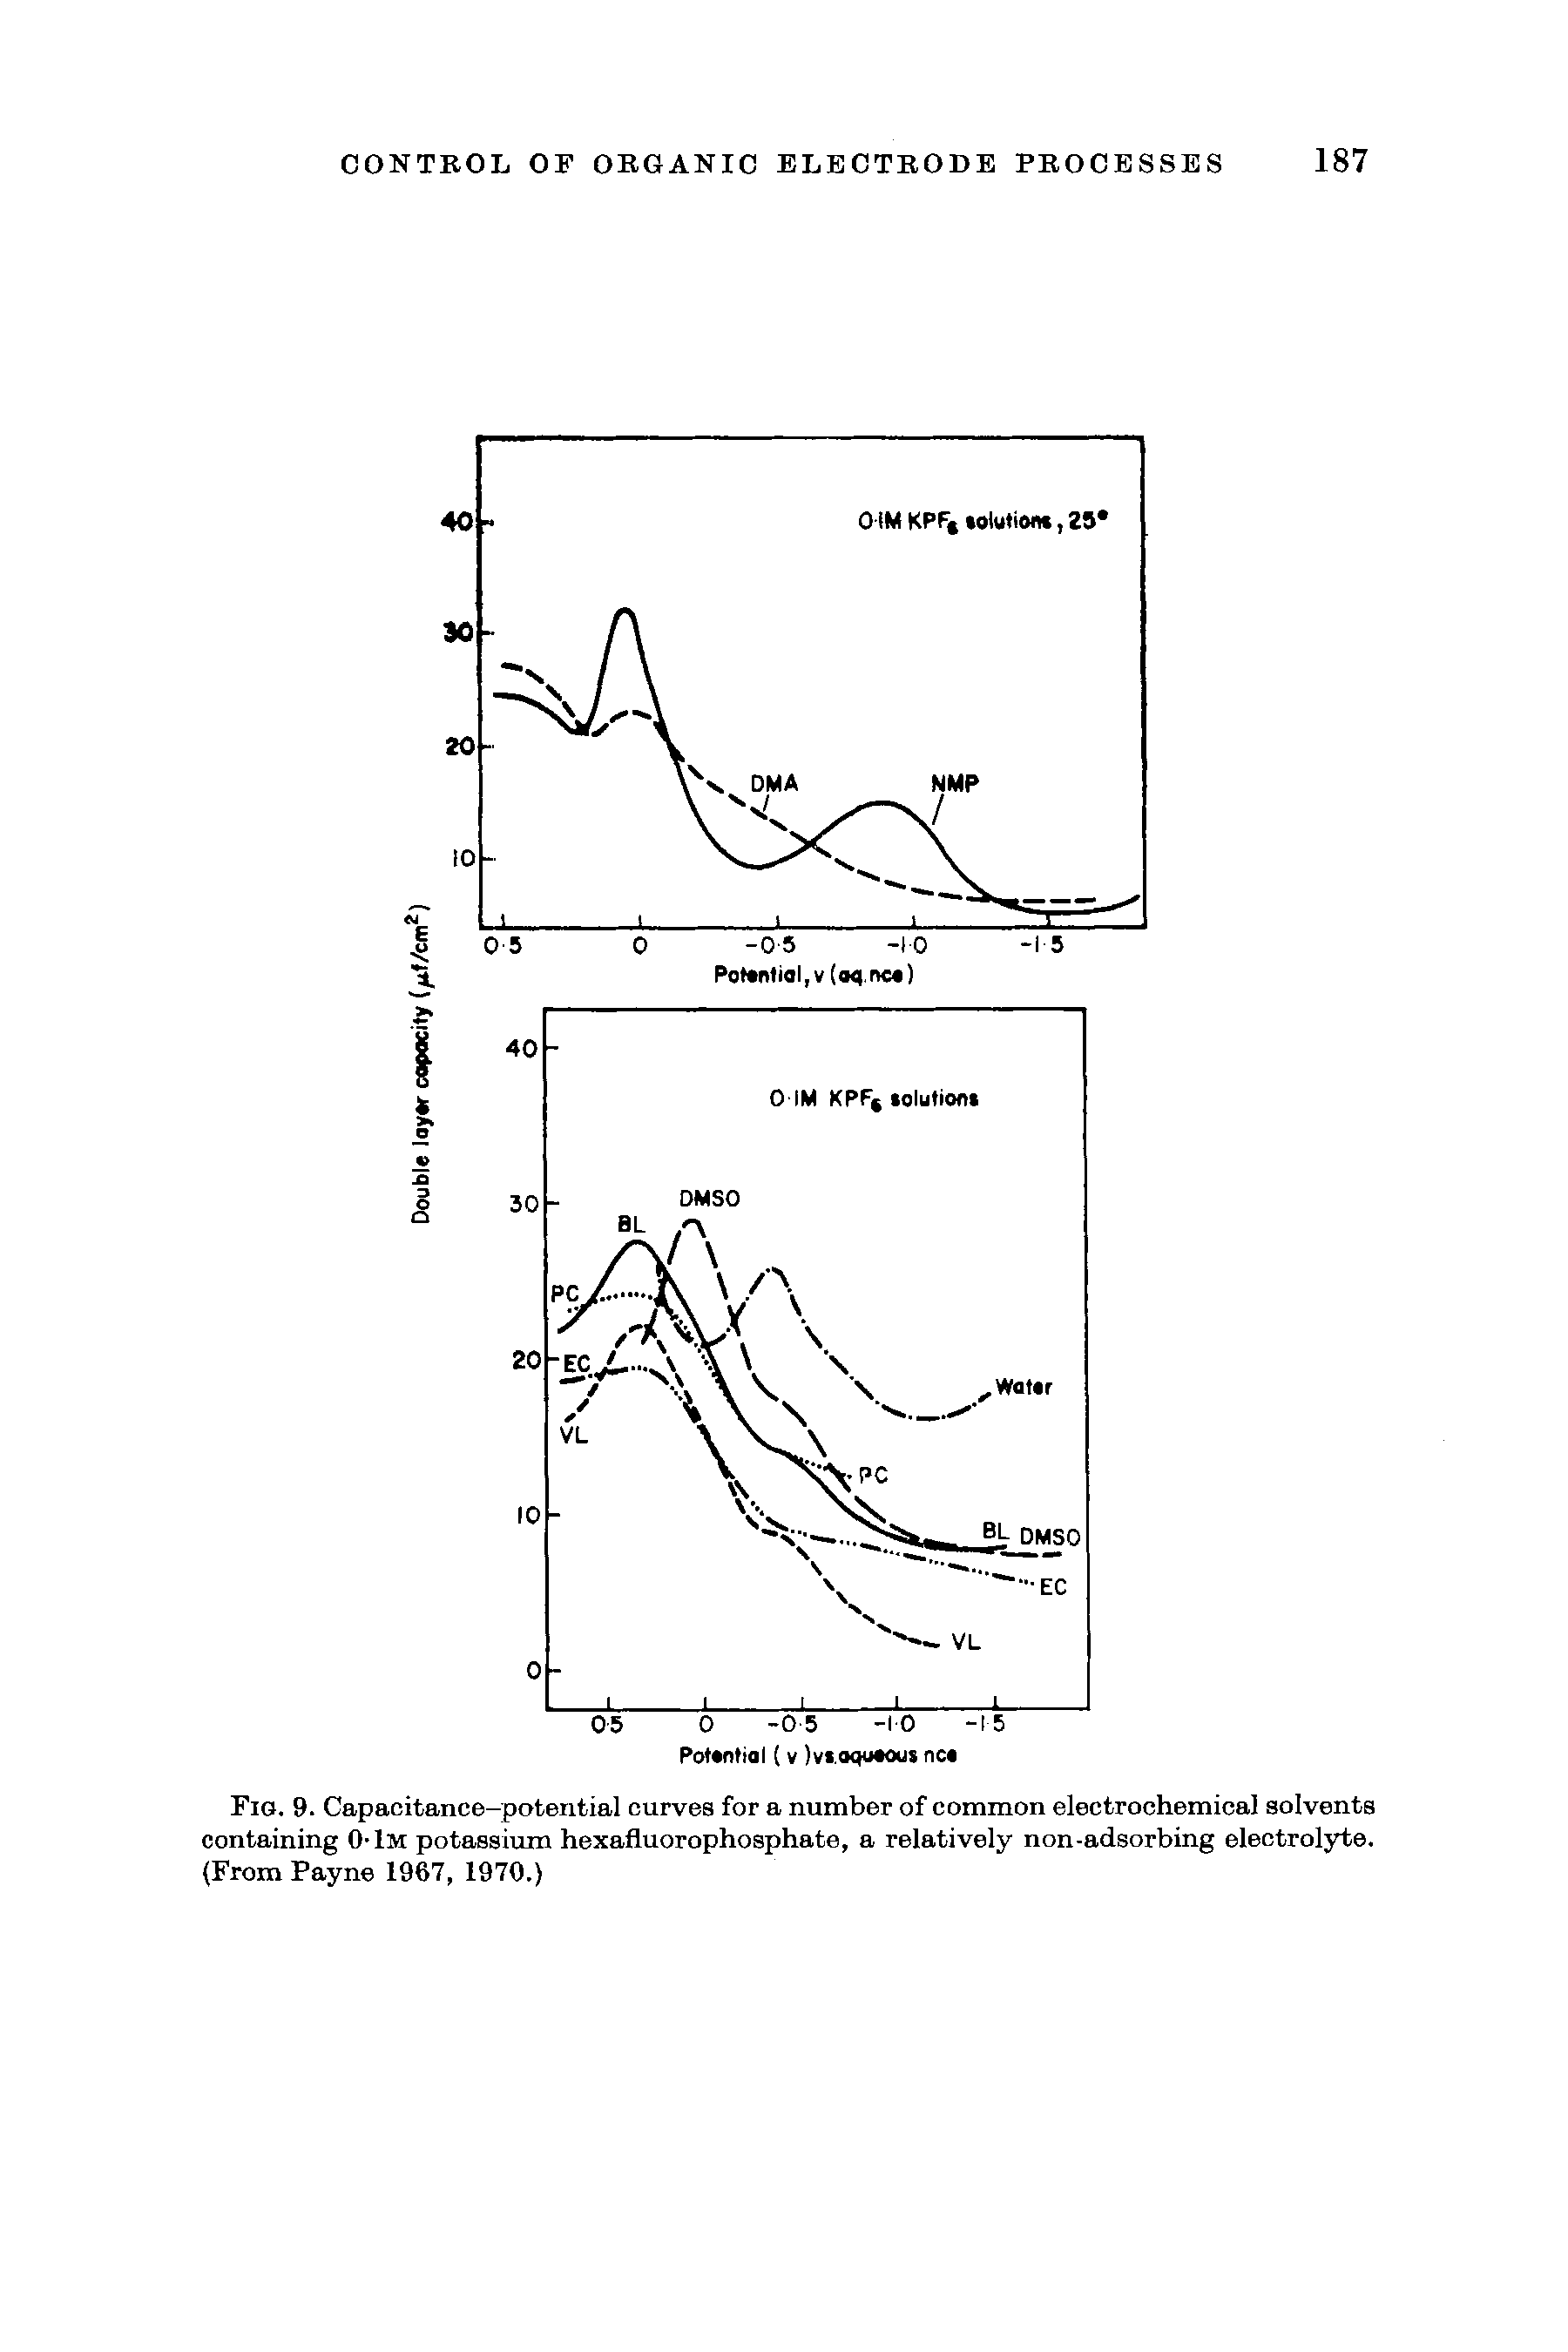 Fig. 9. Capacitance-potential curves for a number of common electrochemical solvents containing O lM potassium hexafluorophosphate, a relatively non-adsorbing electrolyte. (From Payne 1967, 1970.)...